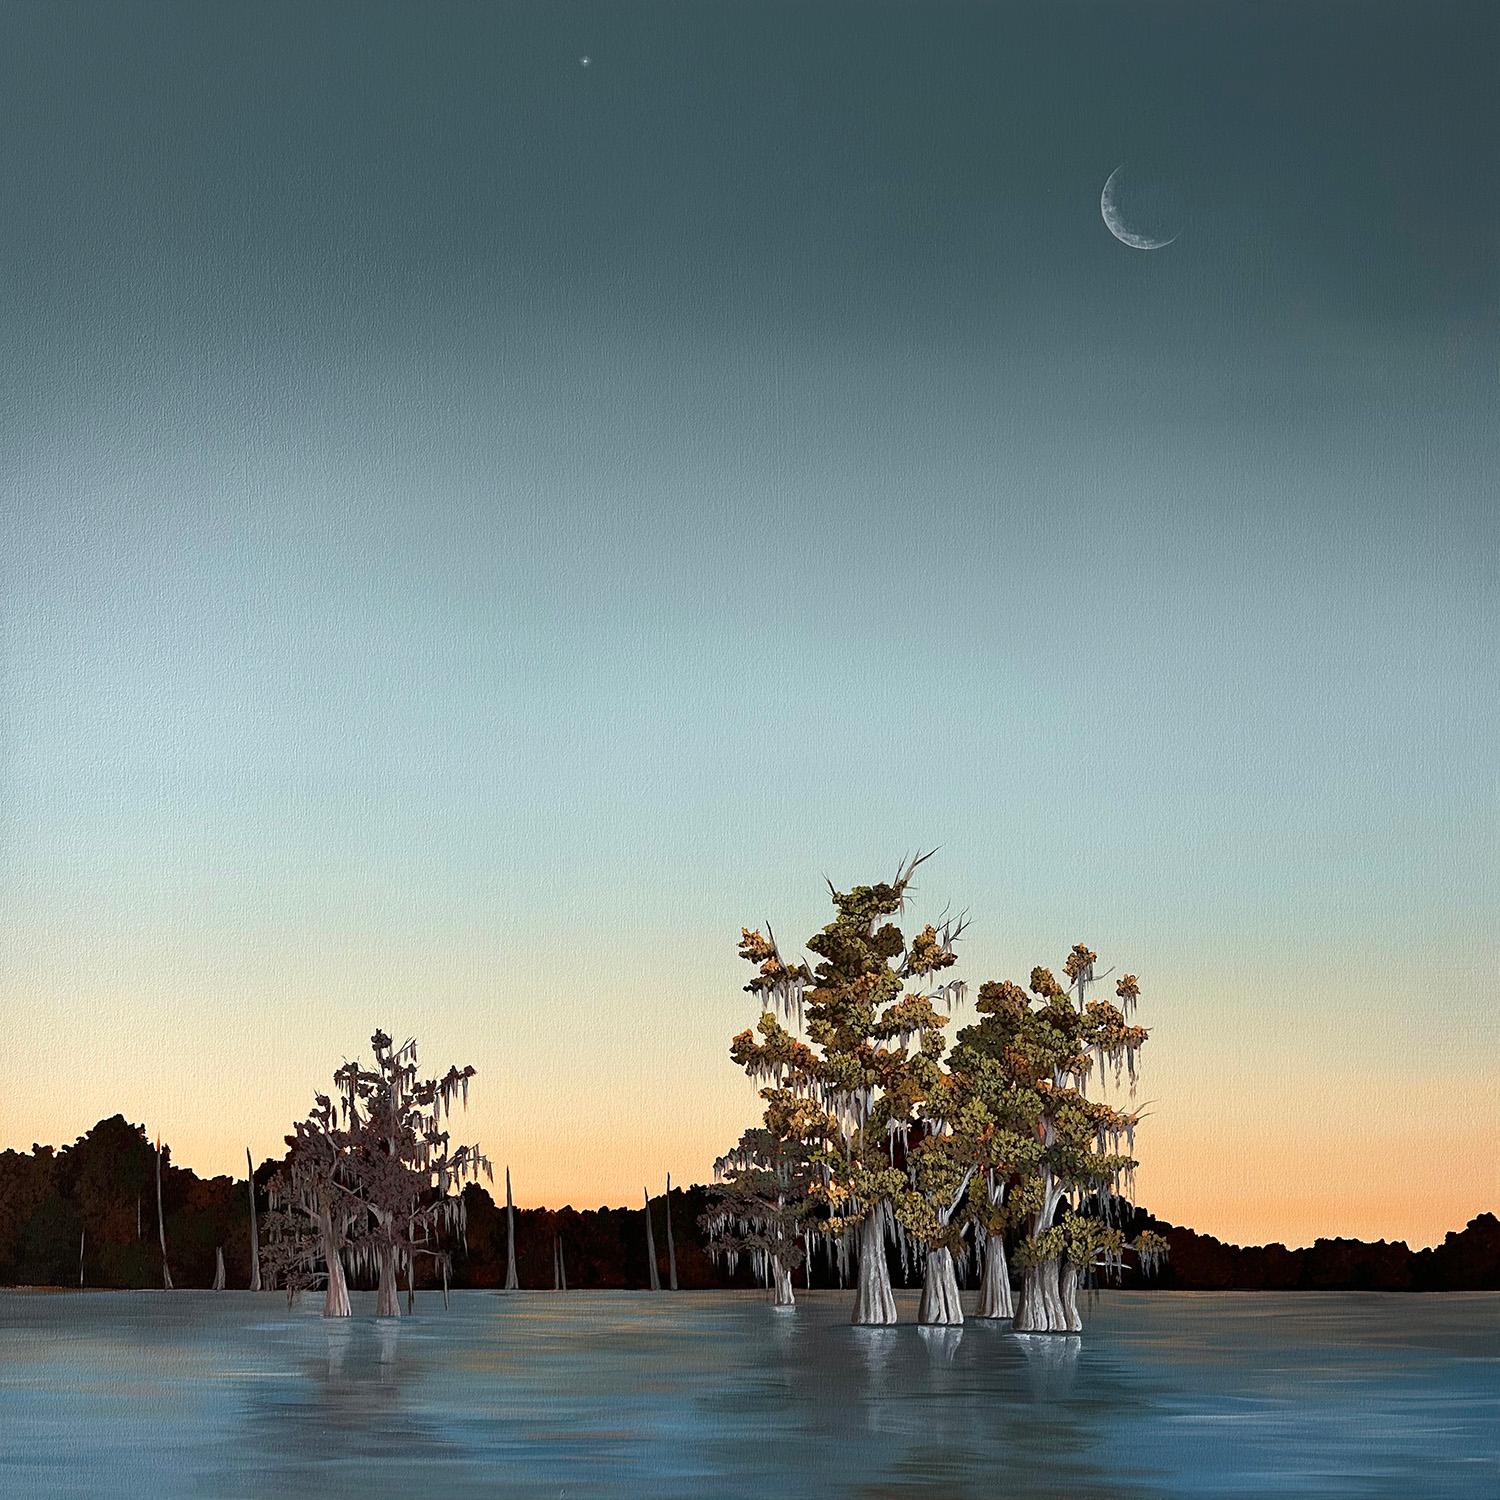 "Bayou Moon", by Kristin Moore, is a part of her 2024 solo exhibition, “Through the Bayou, Into the Garden”, at Ferrara Showman Gallery. Marking a transition from her previous work, "Bayou Moon" shows Kristin Moore directing her eye and palette